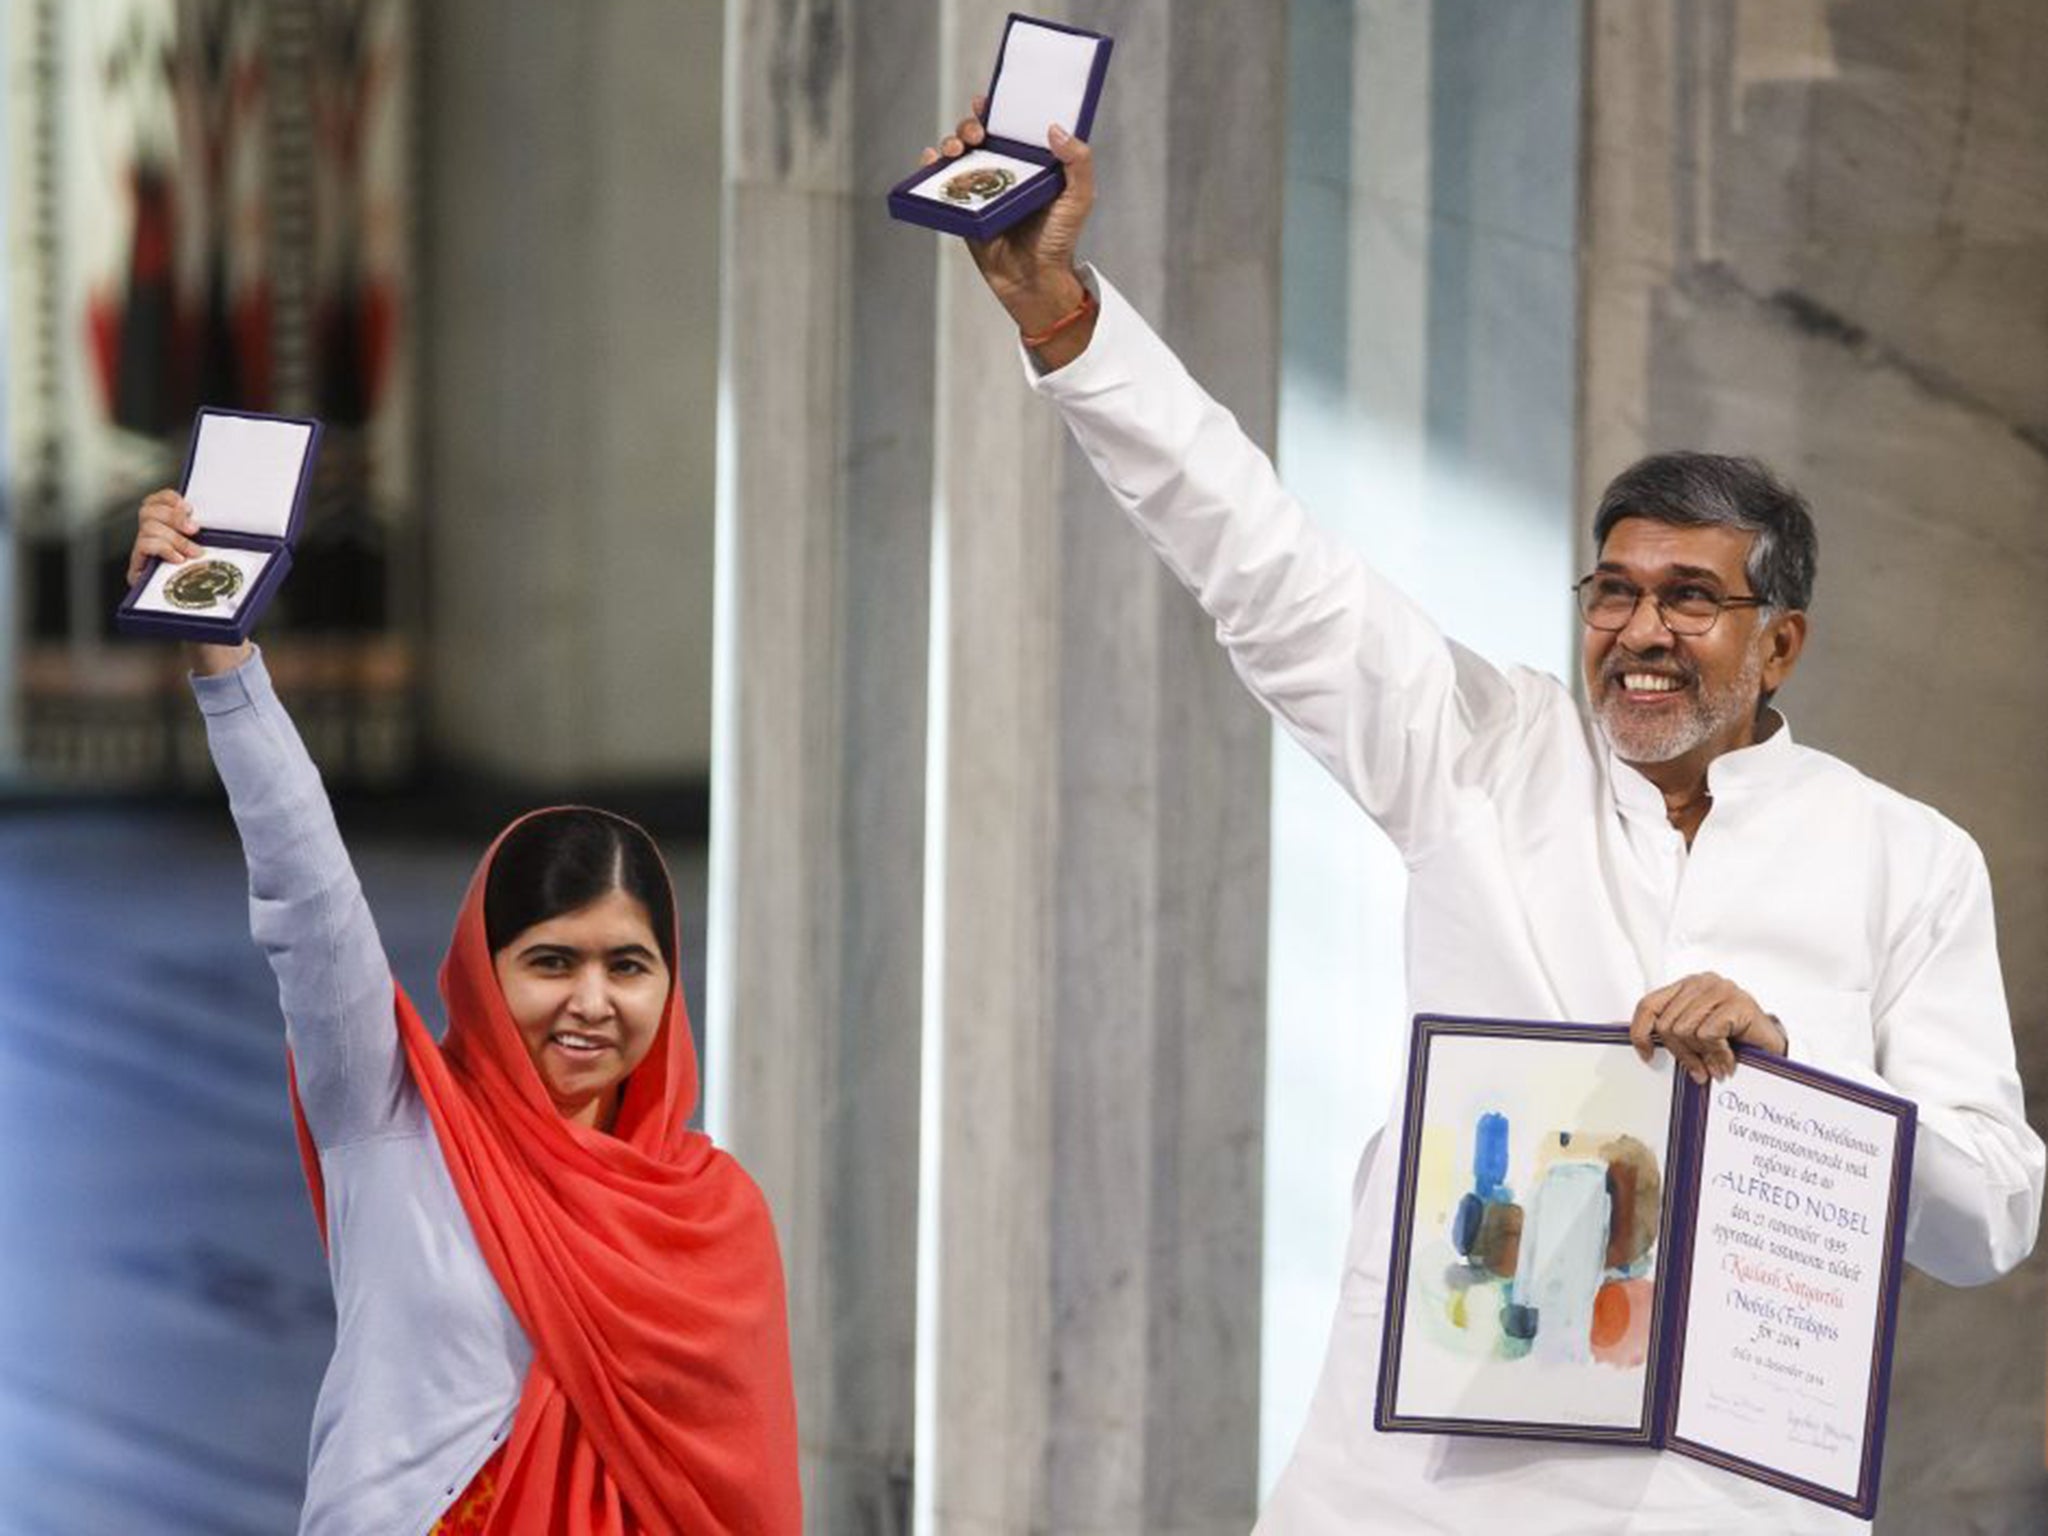 Nobel Peace Prize laureates Kailash Satyarthi, right, and Malala Yousafzai display their medals at the awards ceremony in 2014. The Pakistani activist shared the peace prize with the Indian campaigner, who has fought for 35 years to free thousands of children from virtual slave labour